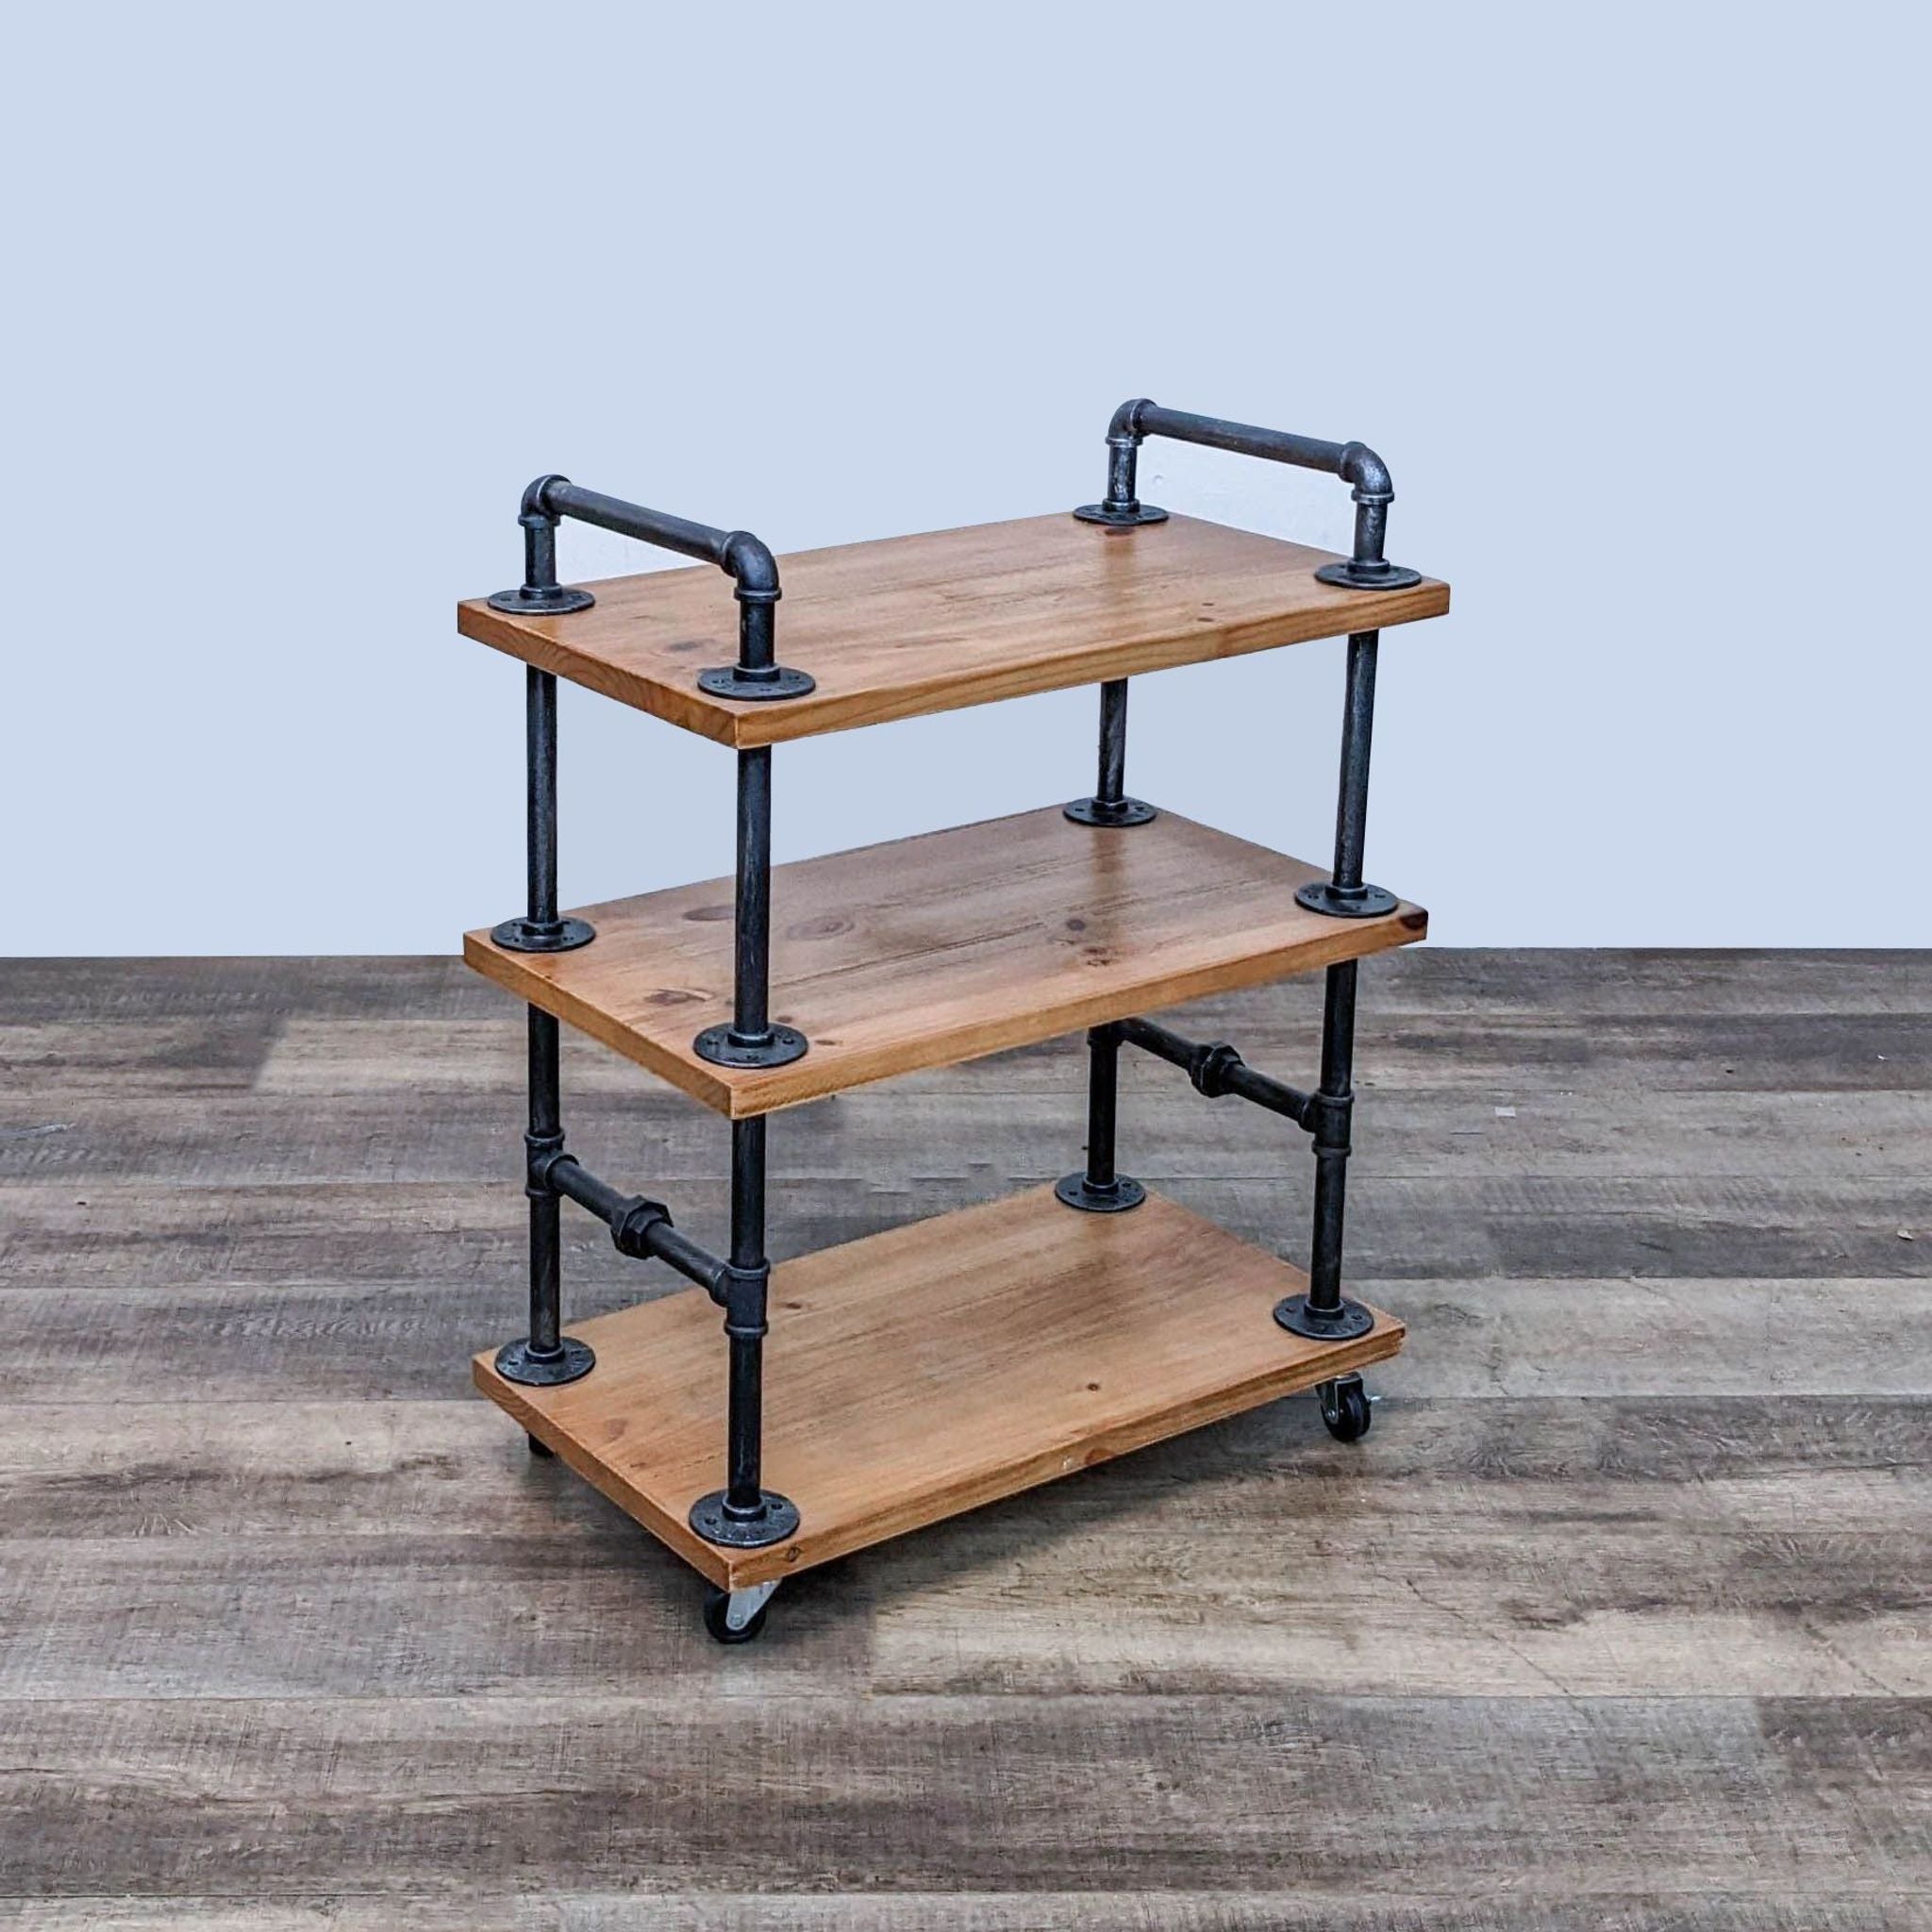 Industrial-style Dofurnilim cart made with wear-resistant wood and heavy-duty water pipe frame, featuring three shelves and wheels.